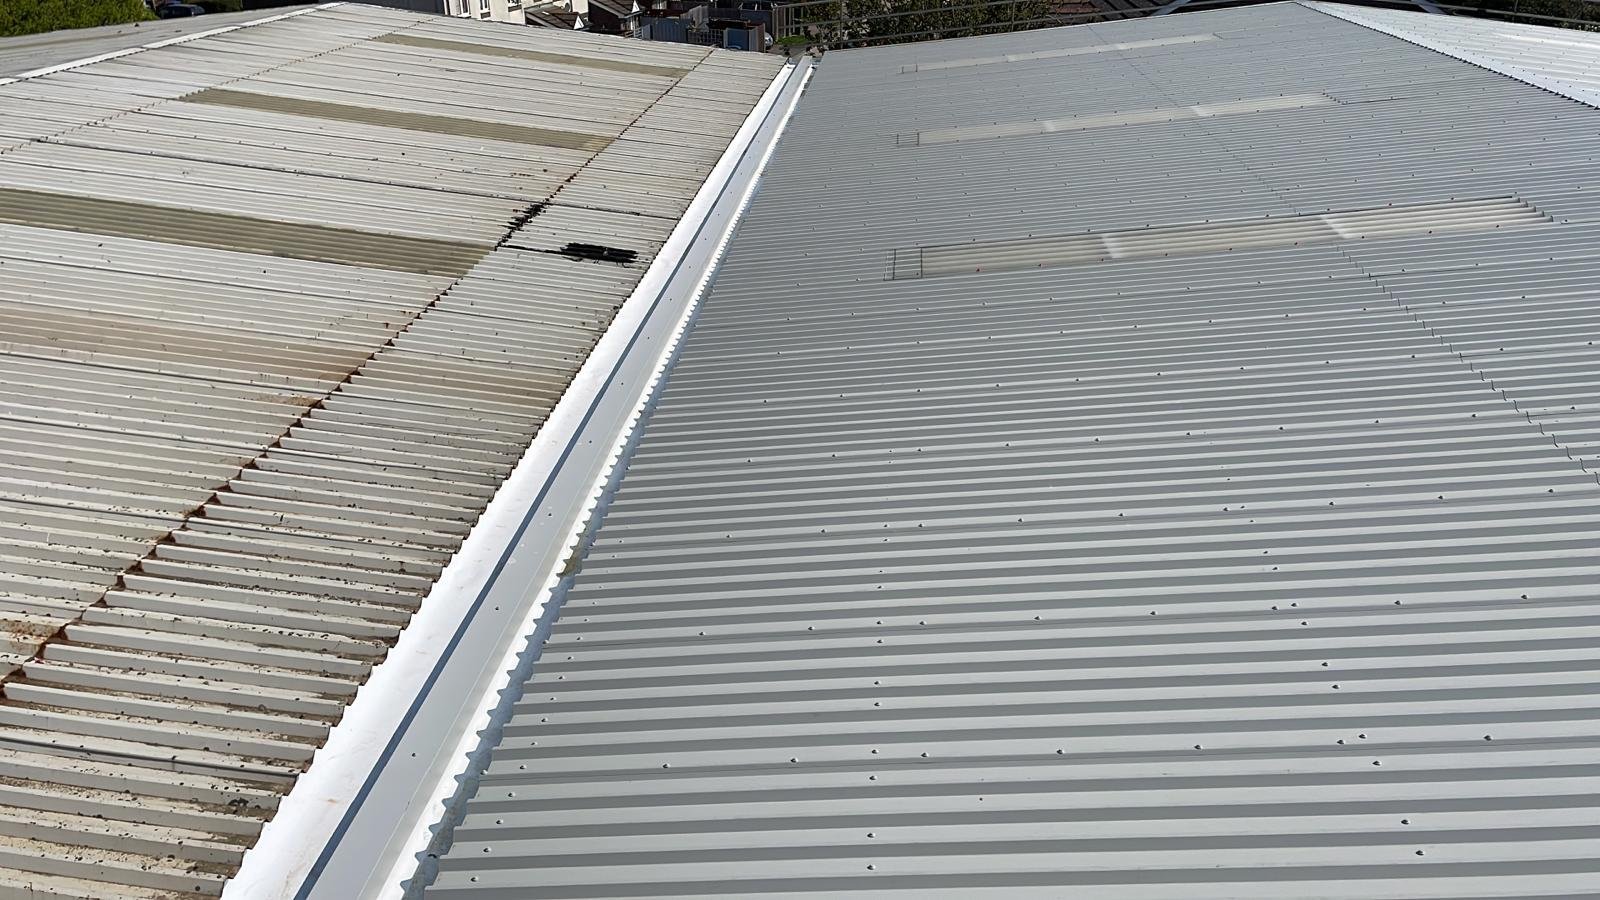 Over Roofing to a Warehouse roof in Littlehampton, West Sussex